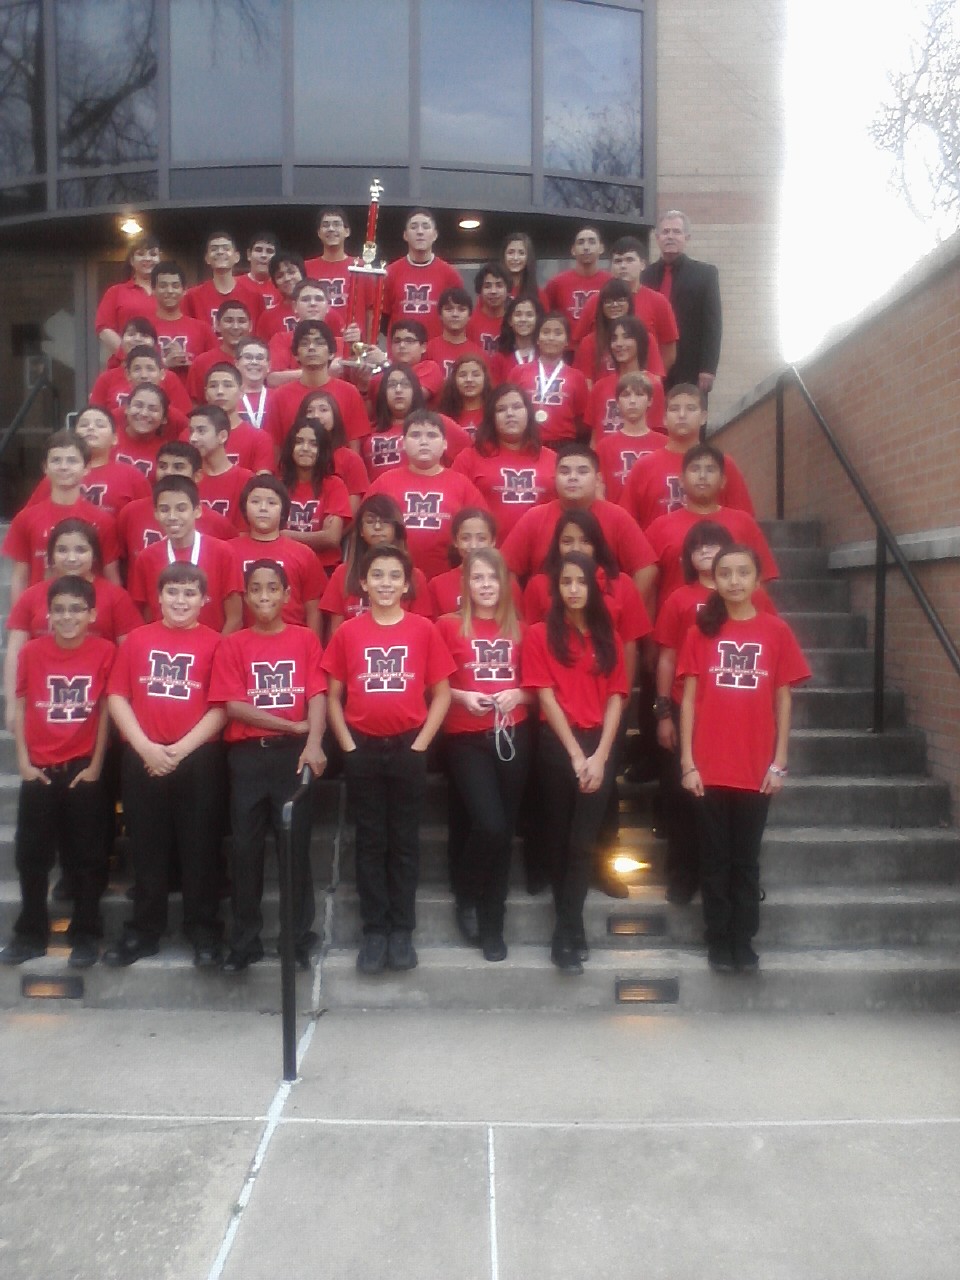 Memorial Jazz Band awarded top prize at university music competition